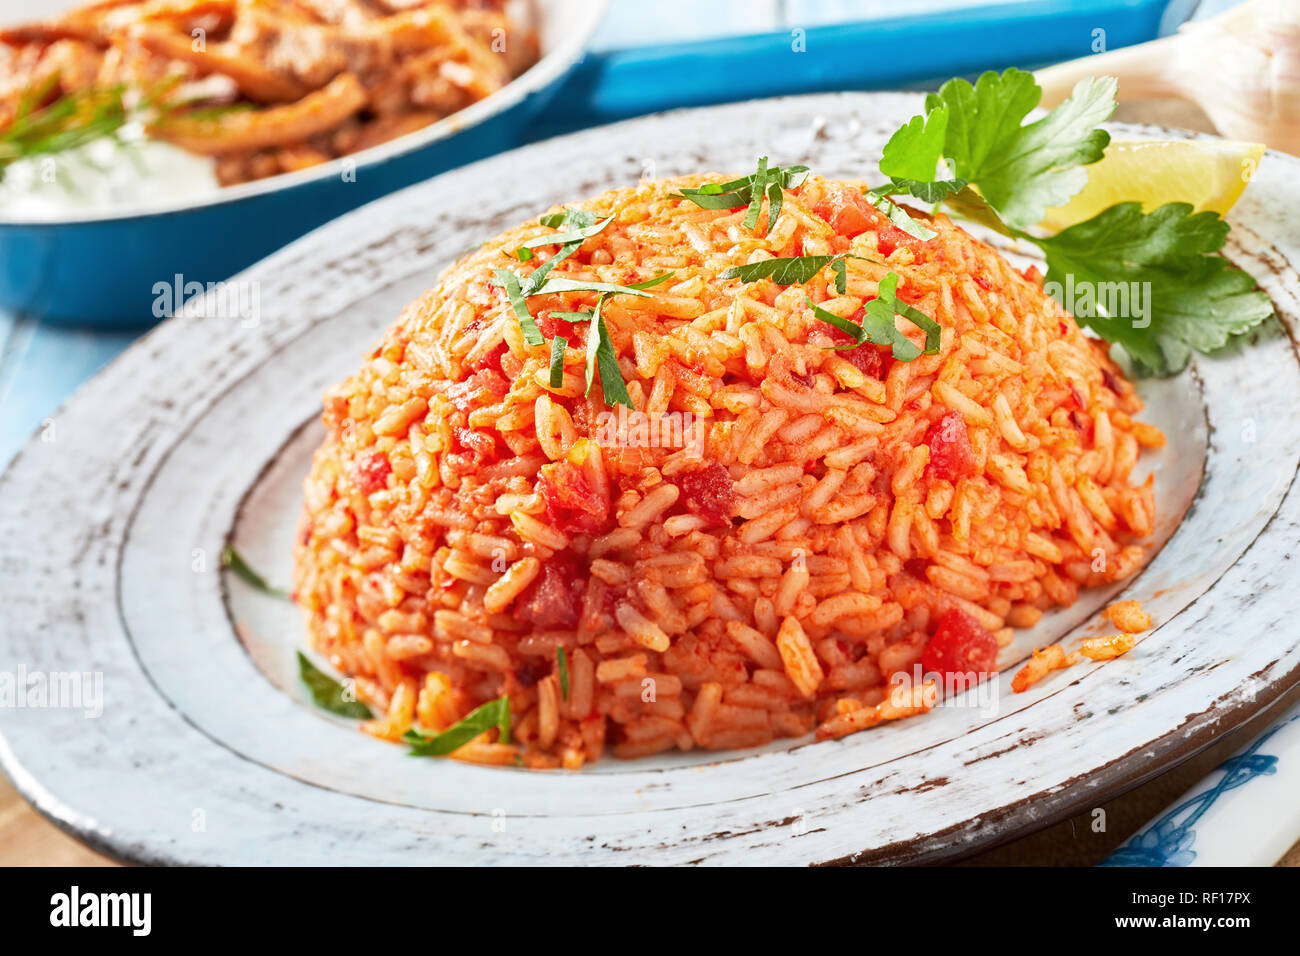 Healthy nutritious plate of Greek tomato rice or pilaf topped with fresh chopped coriander and served on a rustic earthenware plate Stock Photo